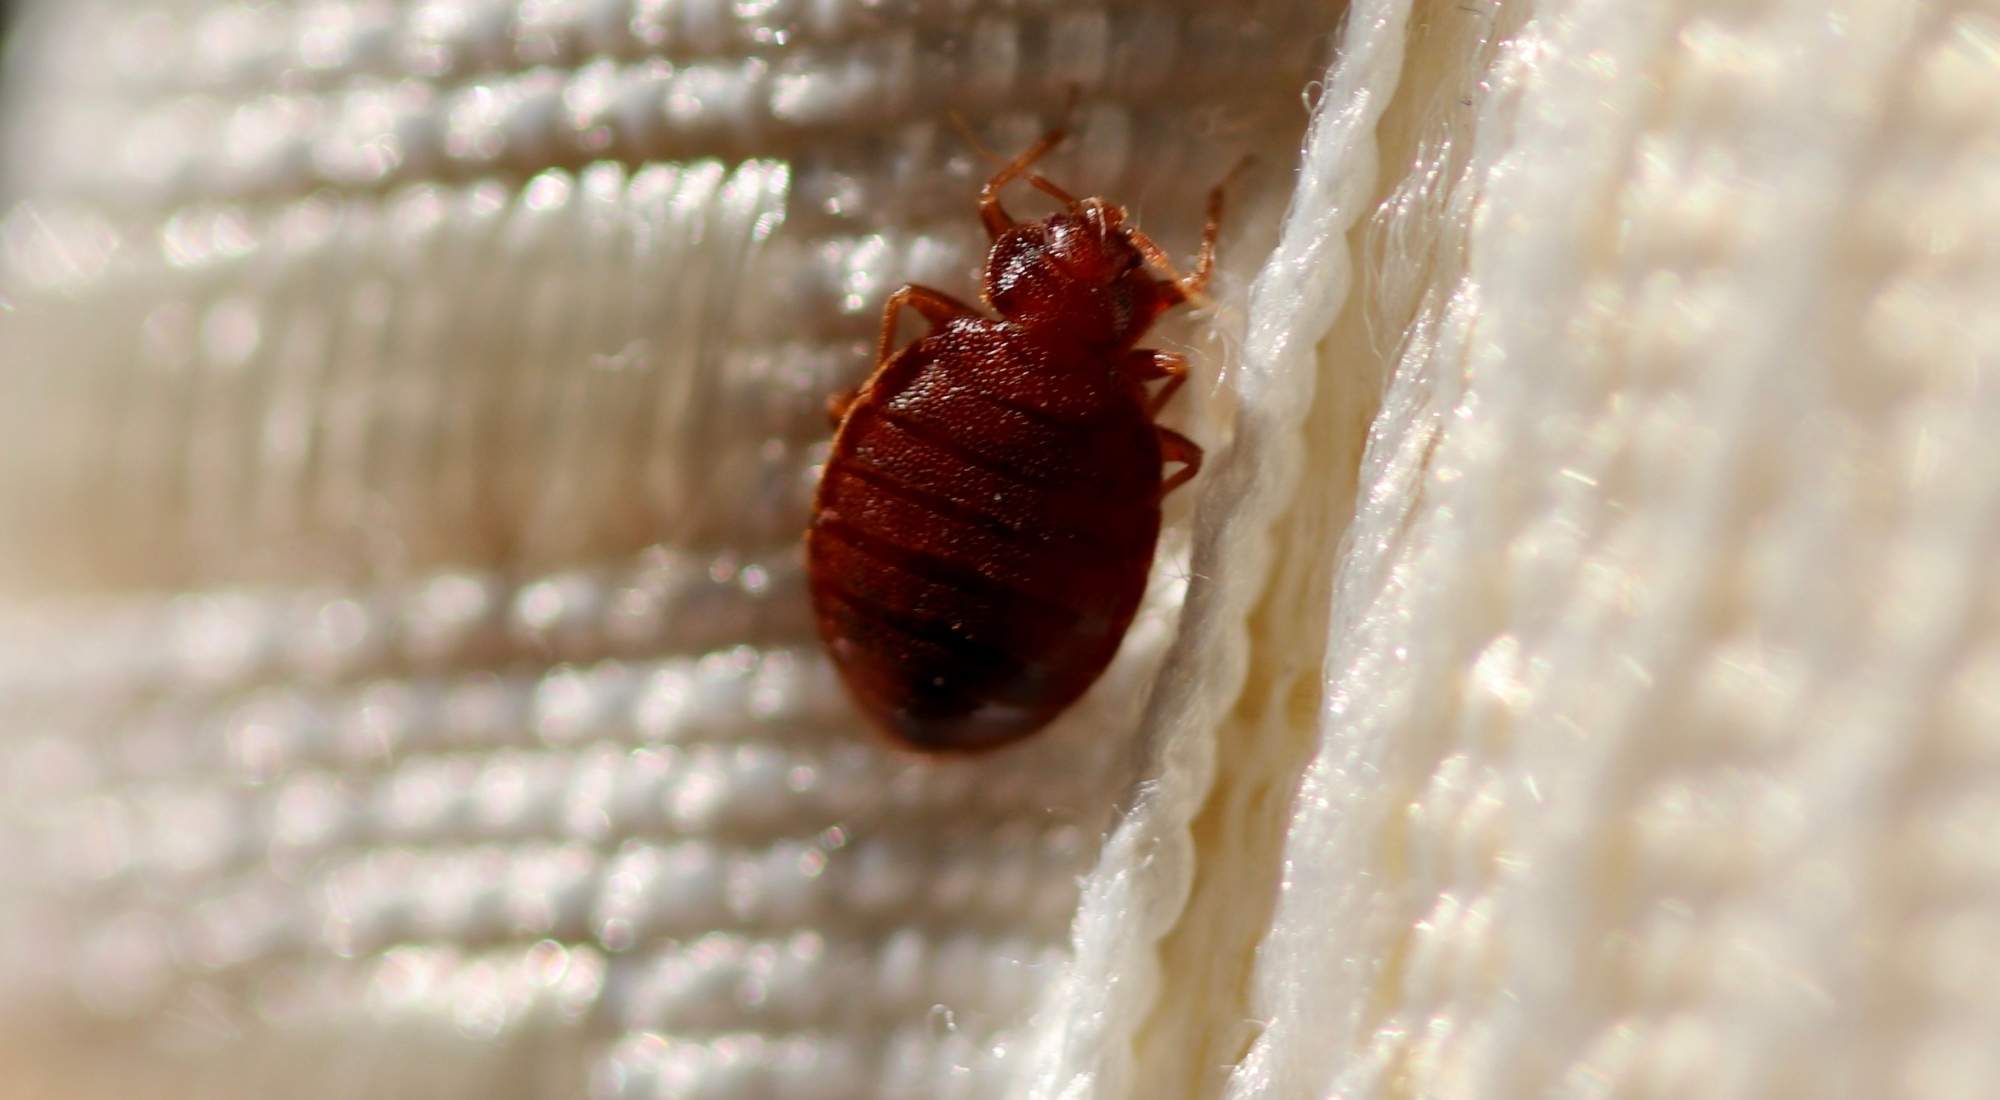 does tenant insurance cover bed bugs